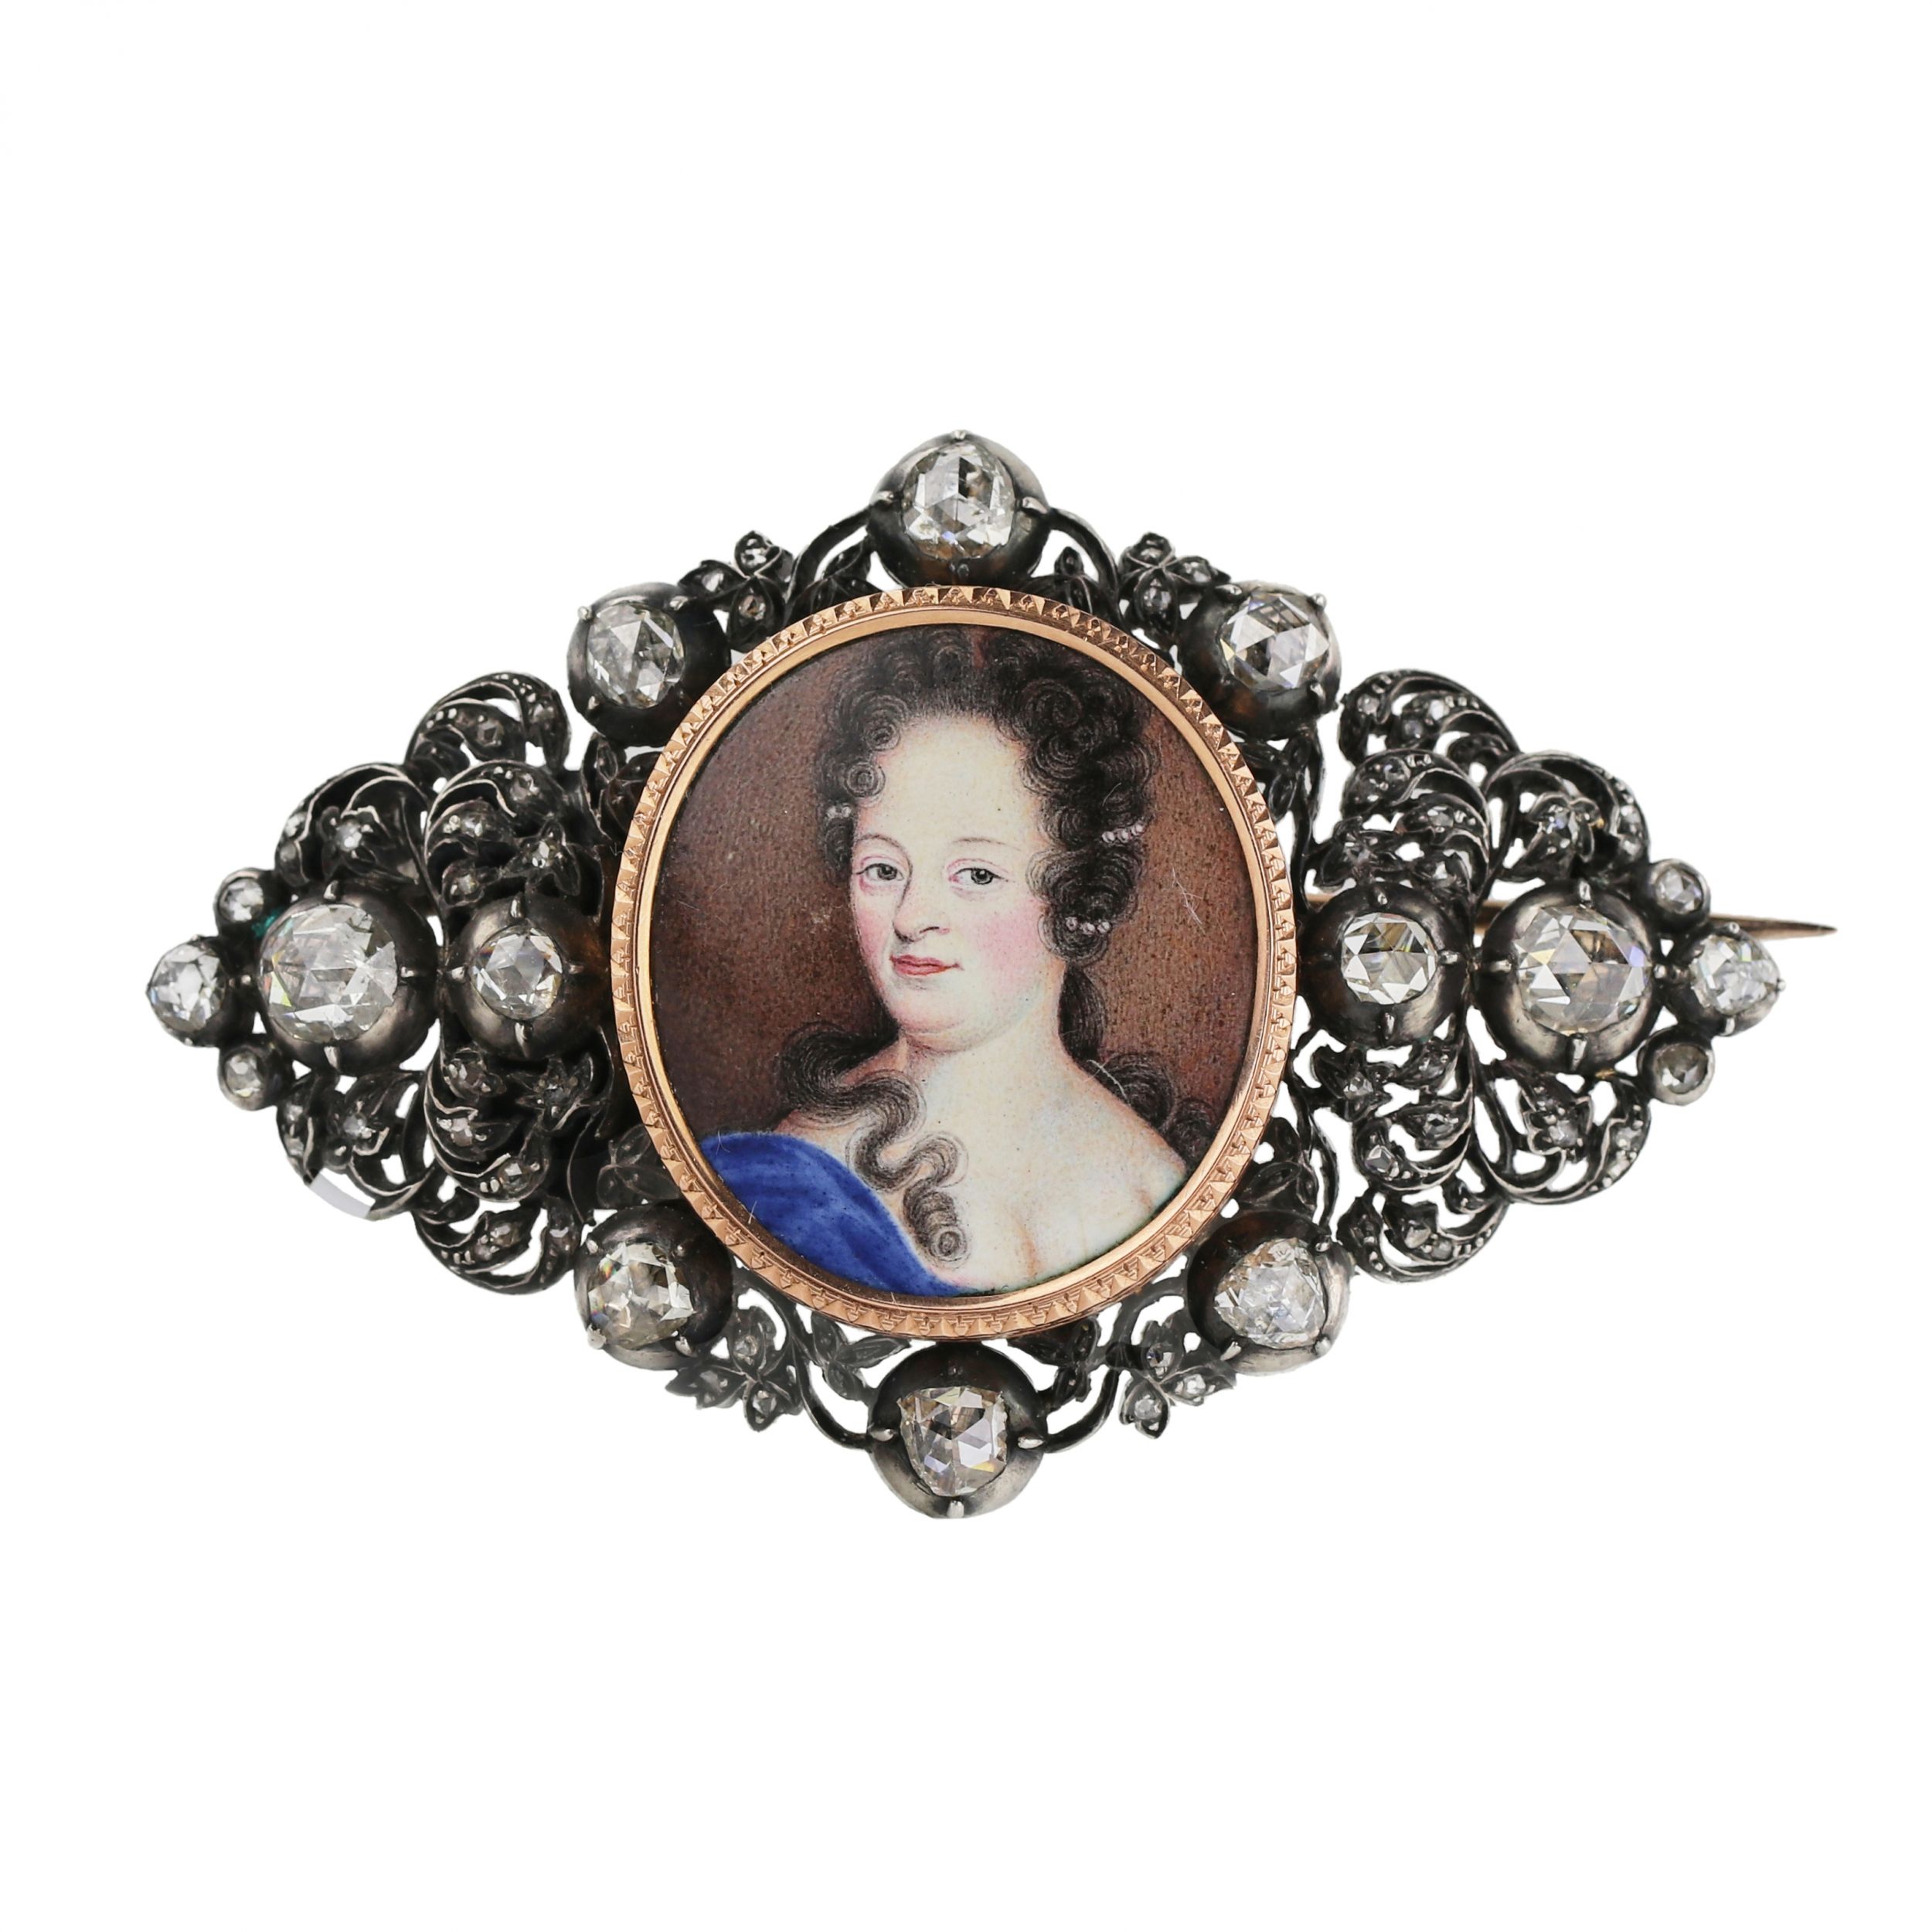 19th-century-diamond-brooch-with-portrait-miniature-in-silver-and-gold-